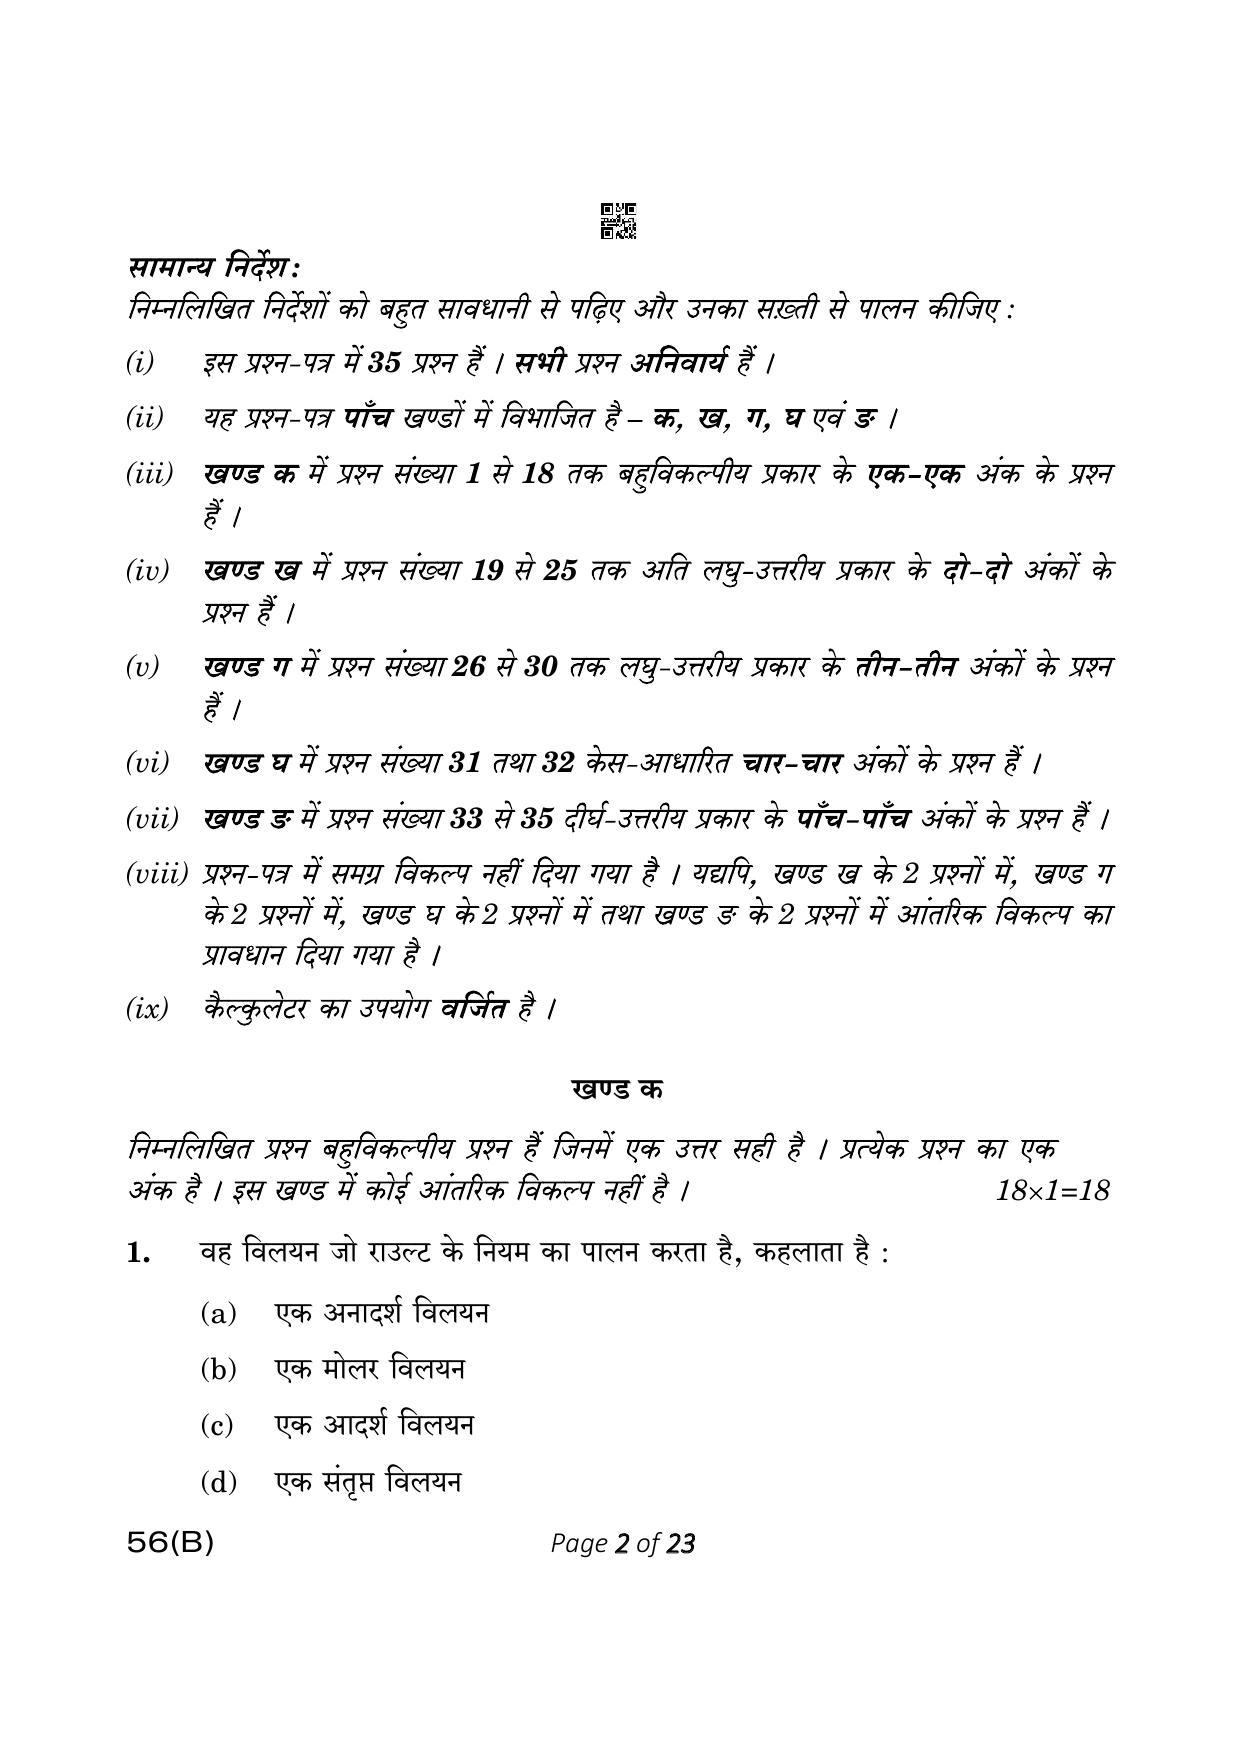 CBSE Class 12 56-B Chemistry 2023 (Compartment) Question Paper - Page 2